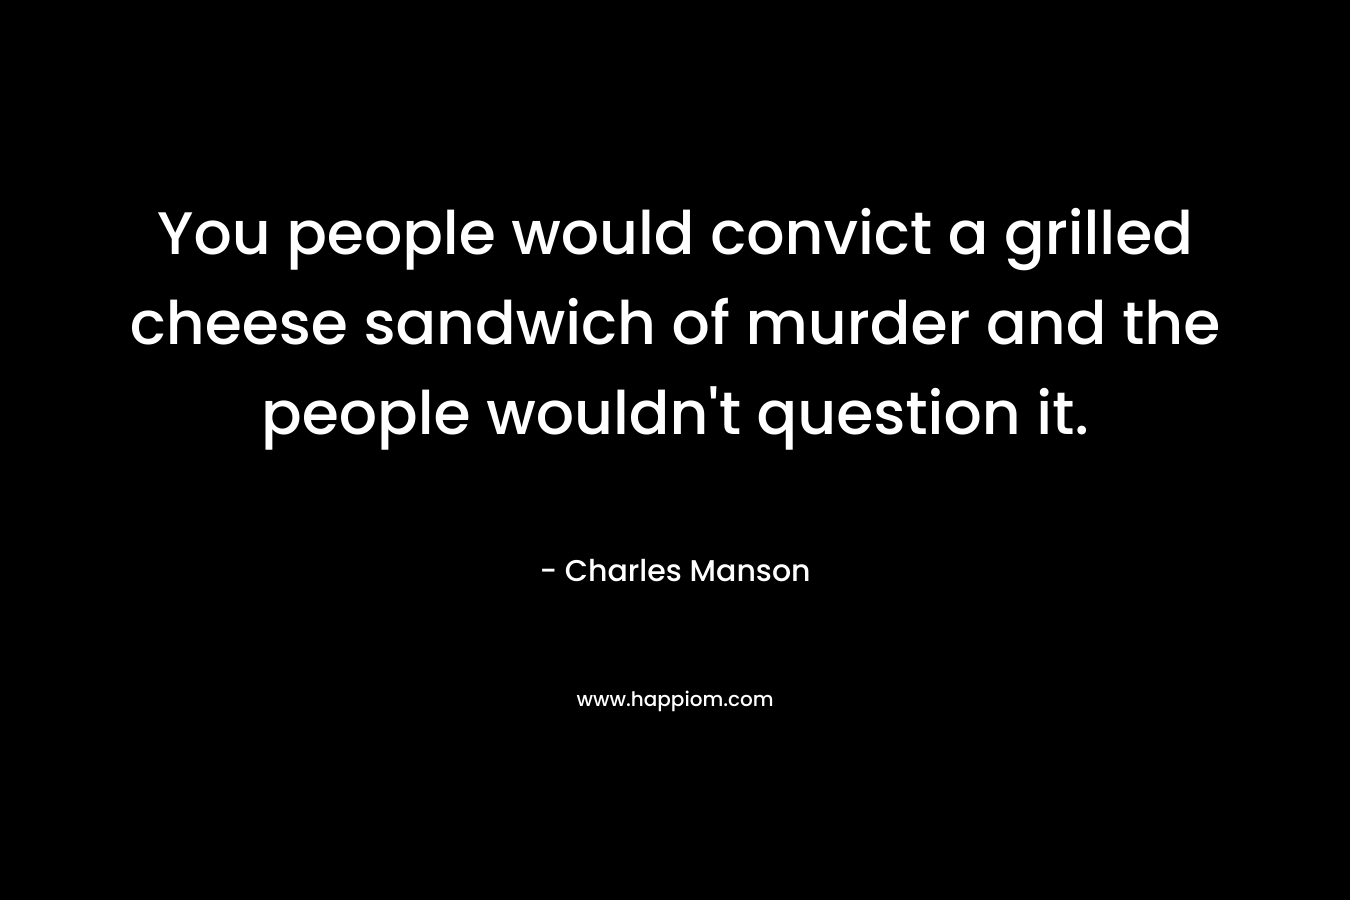 You people would convict a grilled cheese sandwich of murder and the people wouldn’t question it. – Charles Manson